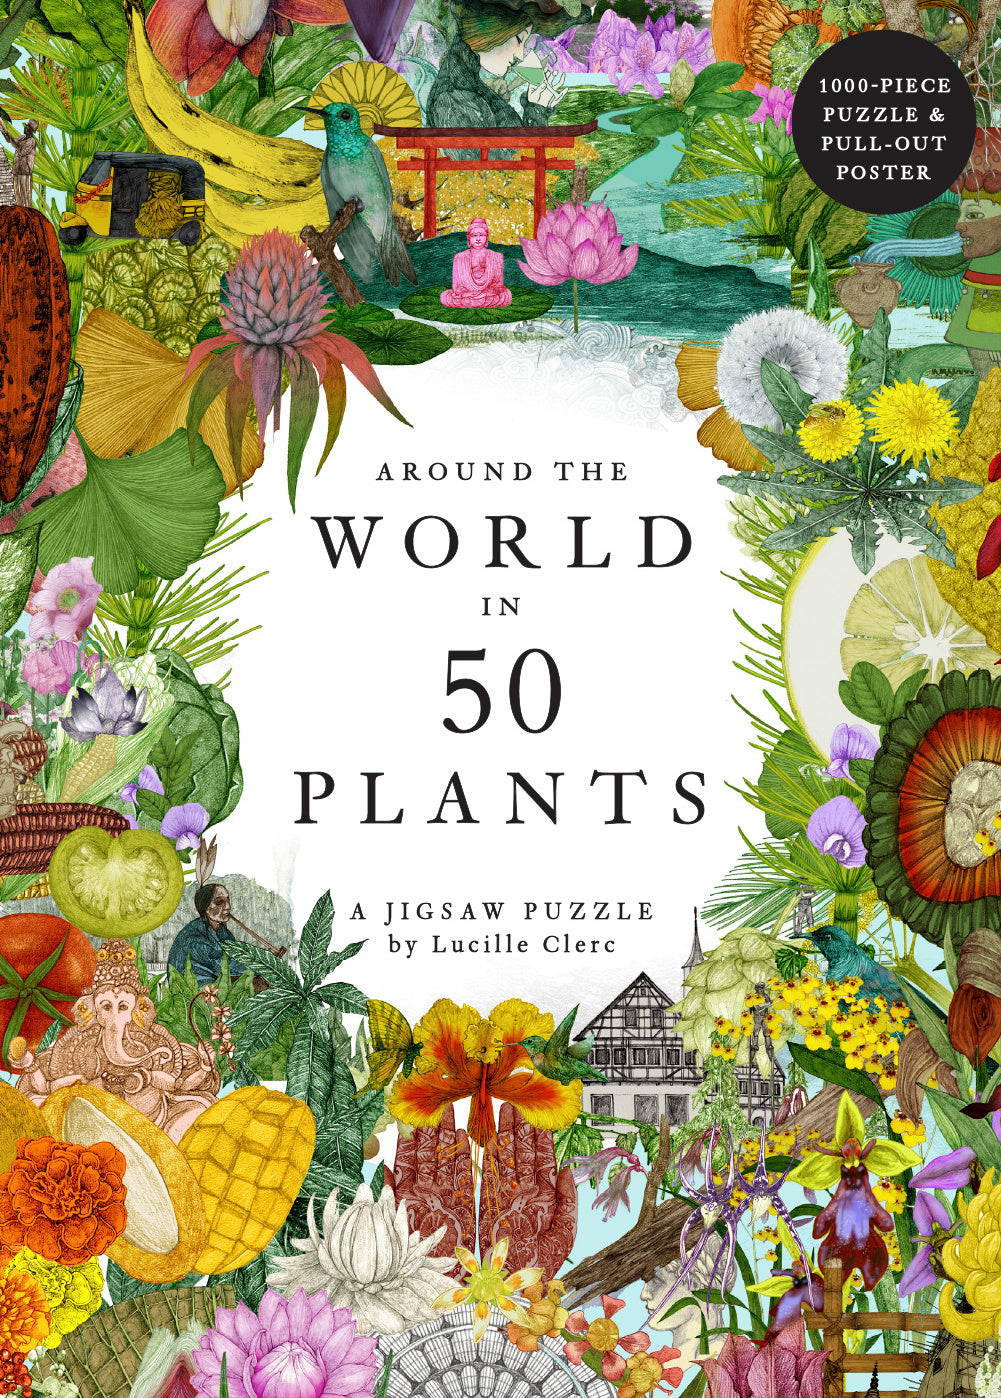 Around the World in 50 Plants: 1000 Piece Jigsaw Puzzle